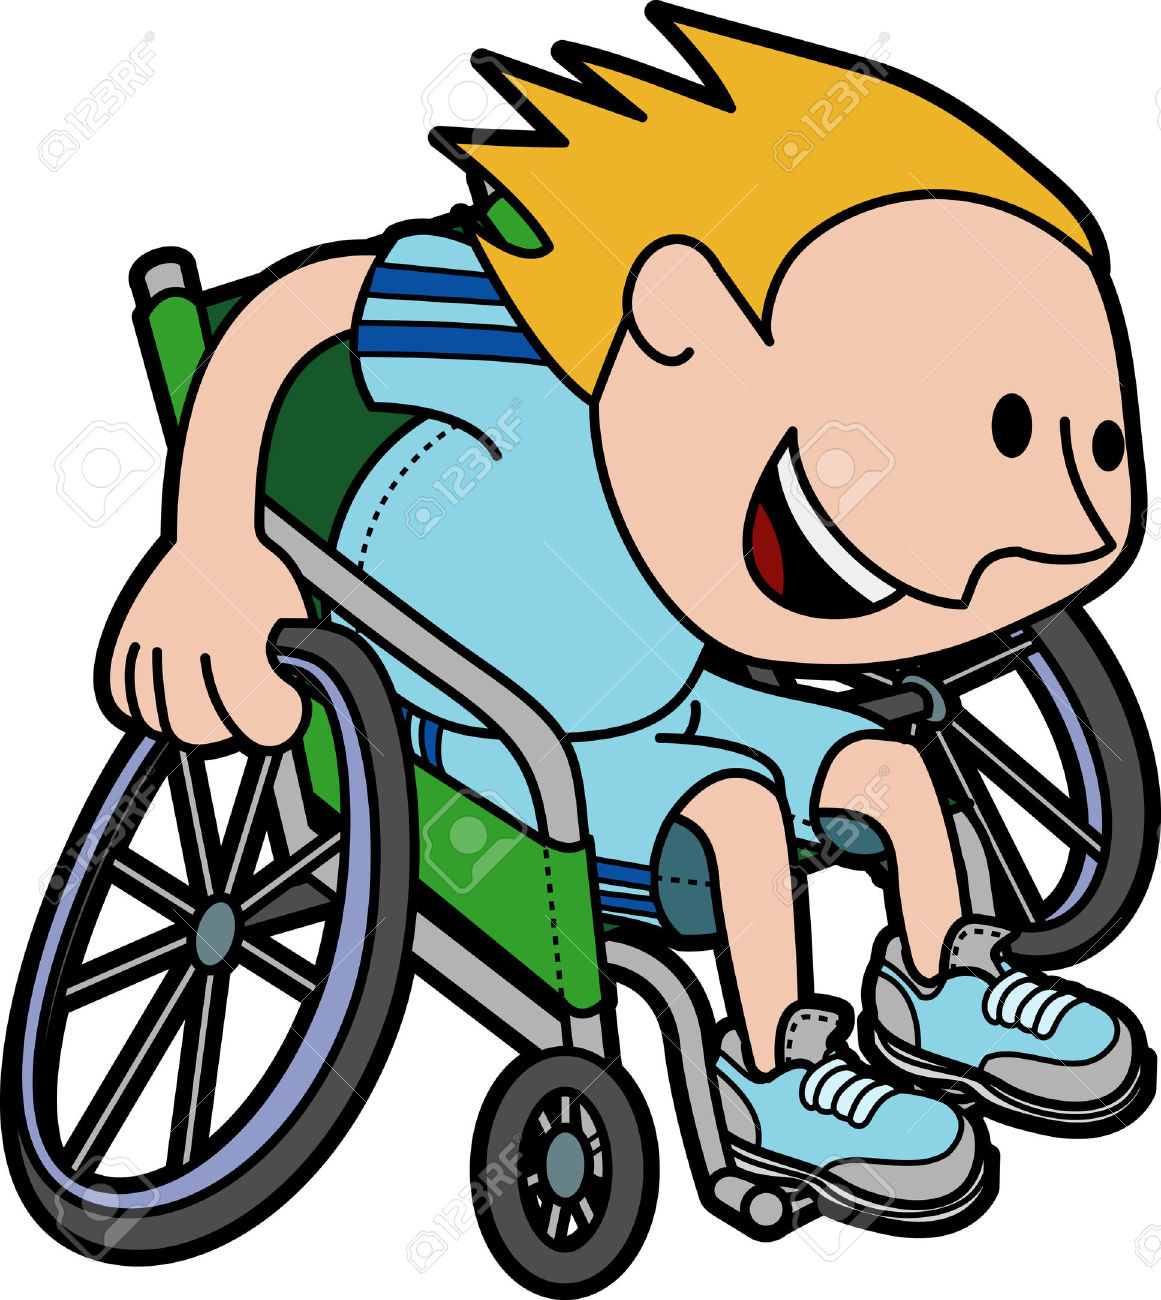 Illustration Of Young Boy Athlete Racing In Wheelchair Royalty.